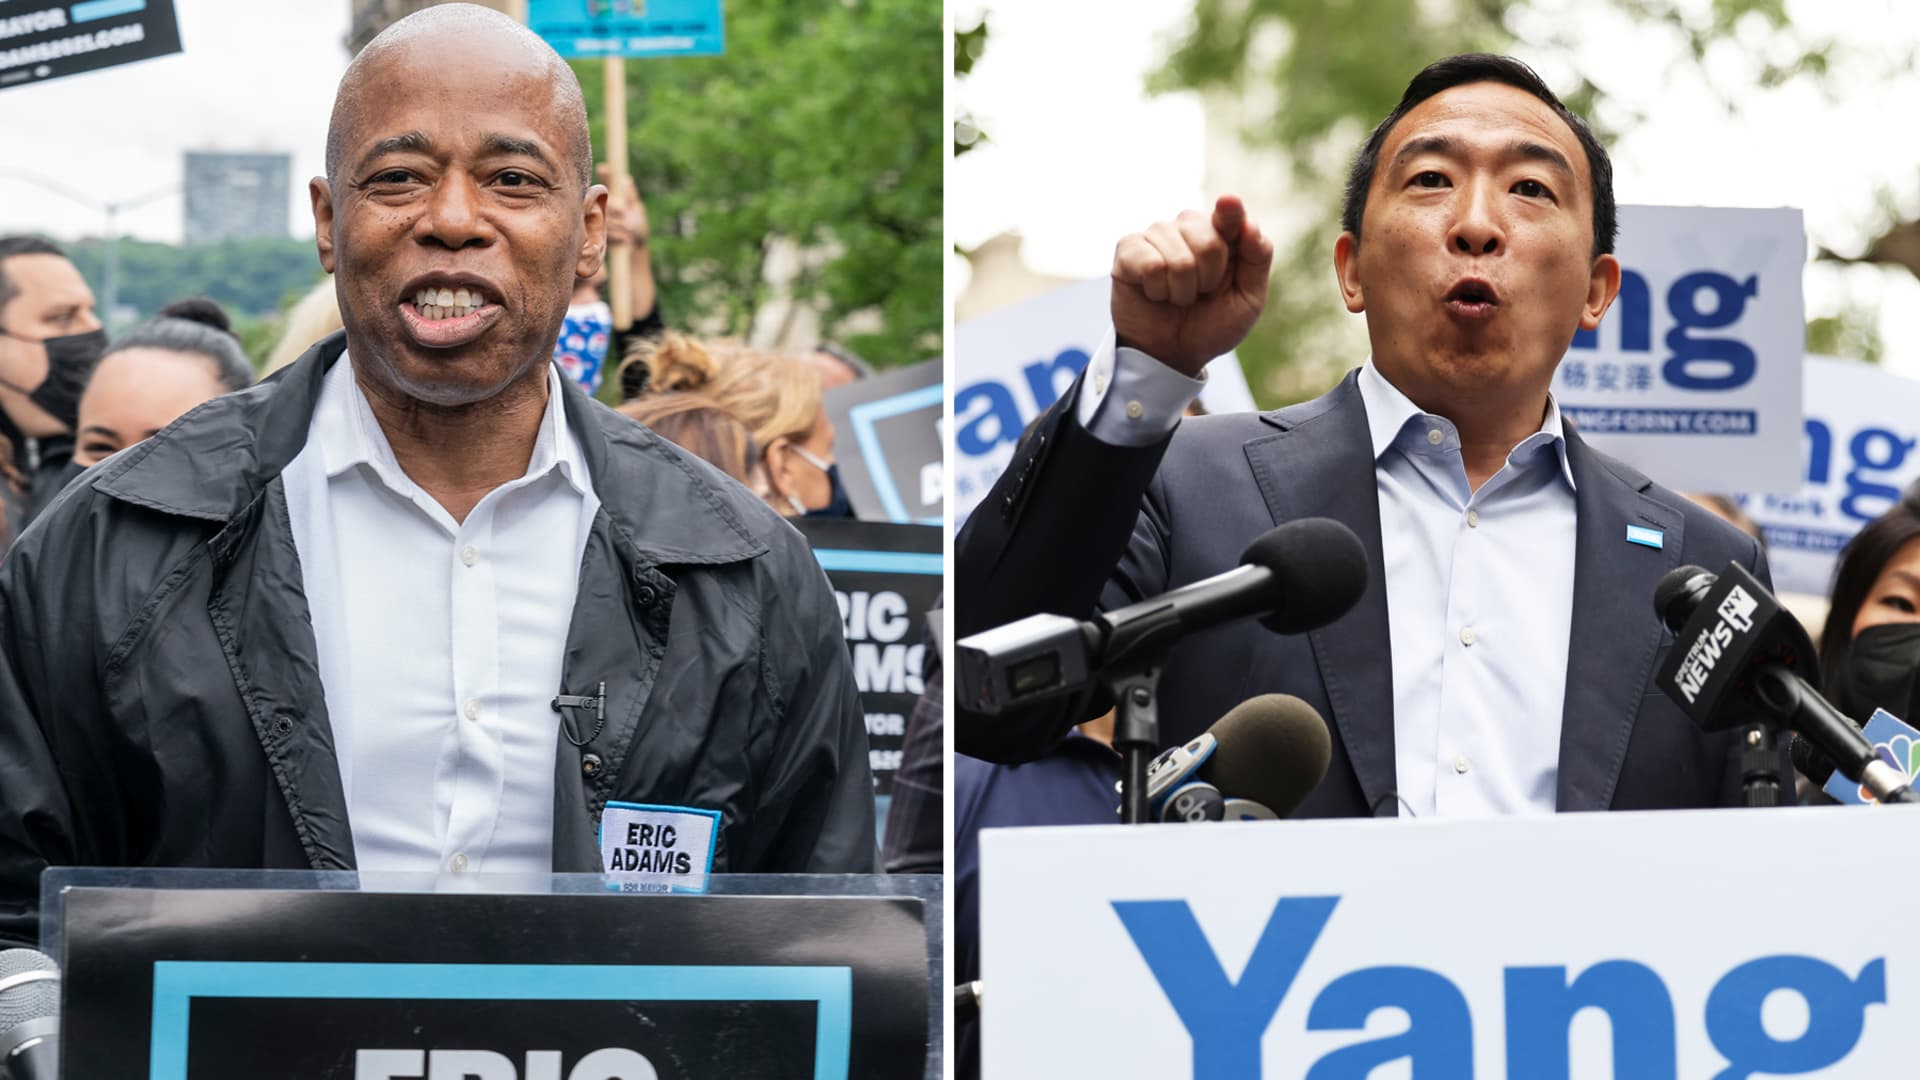 Mayoral candidates Eric Adams (L) and Andrew Yang